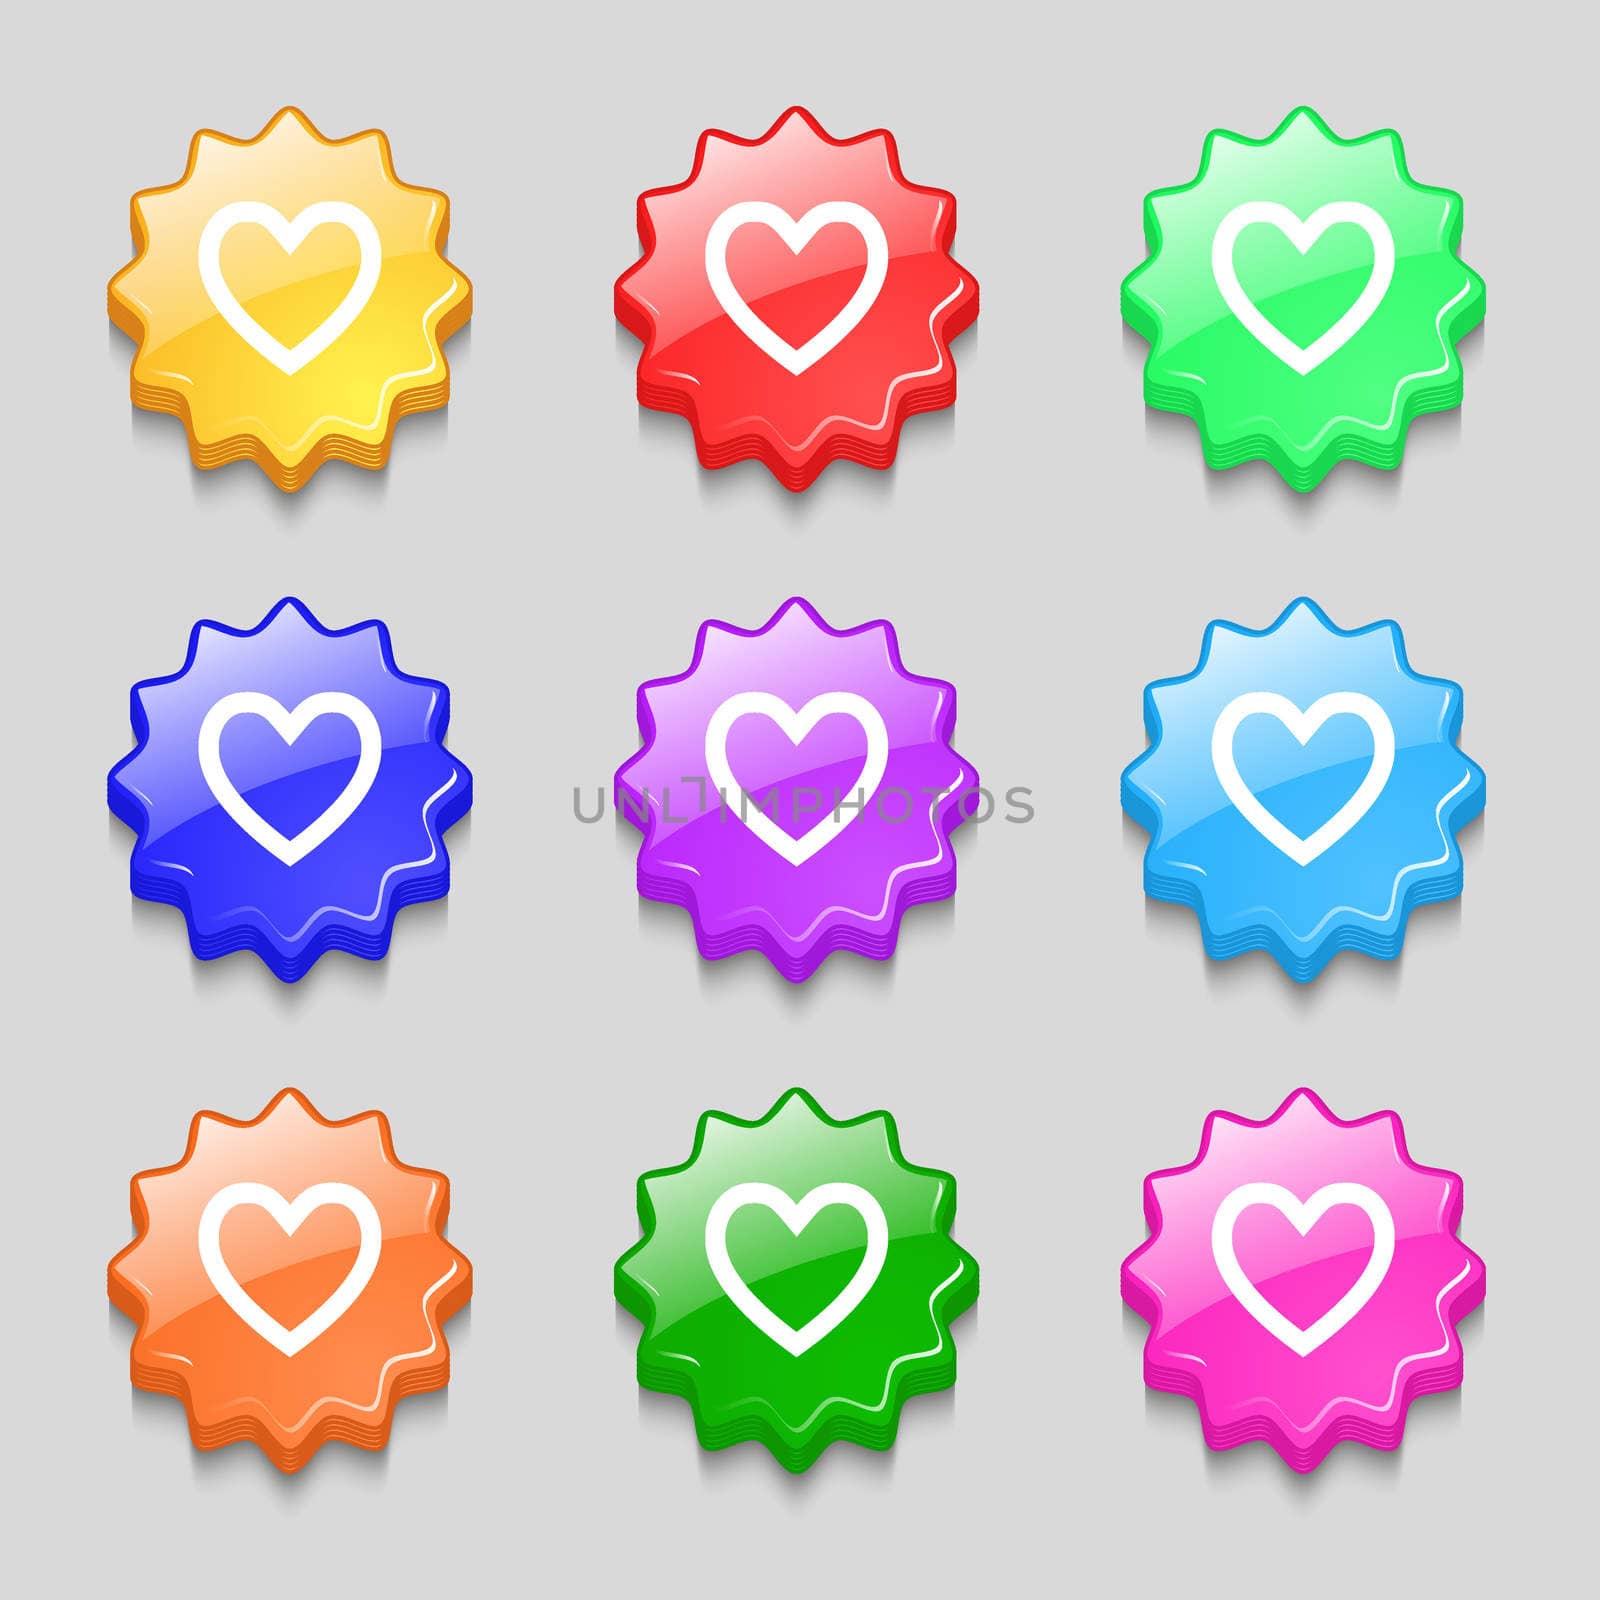 Heart sign icon. Love symbol. Symbols on nine wavy colourful buttons. illustration